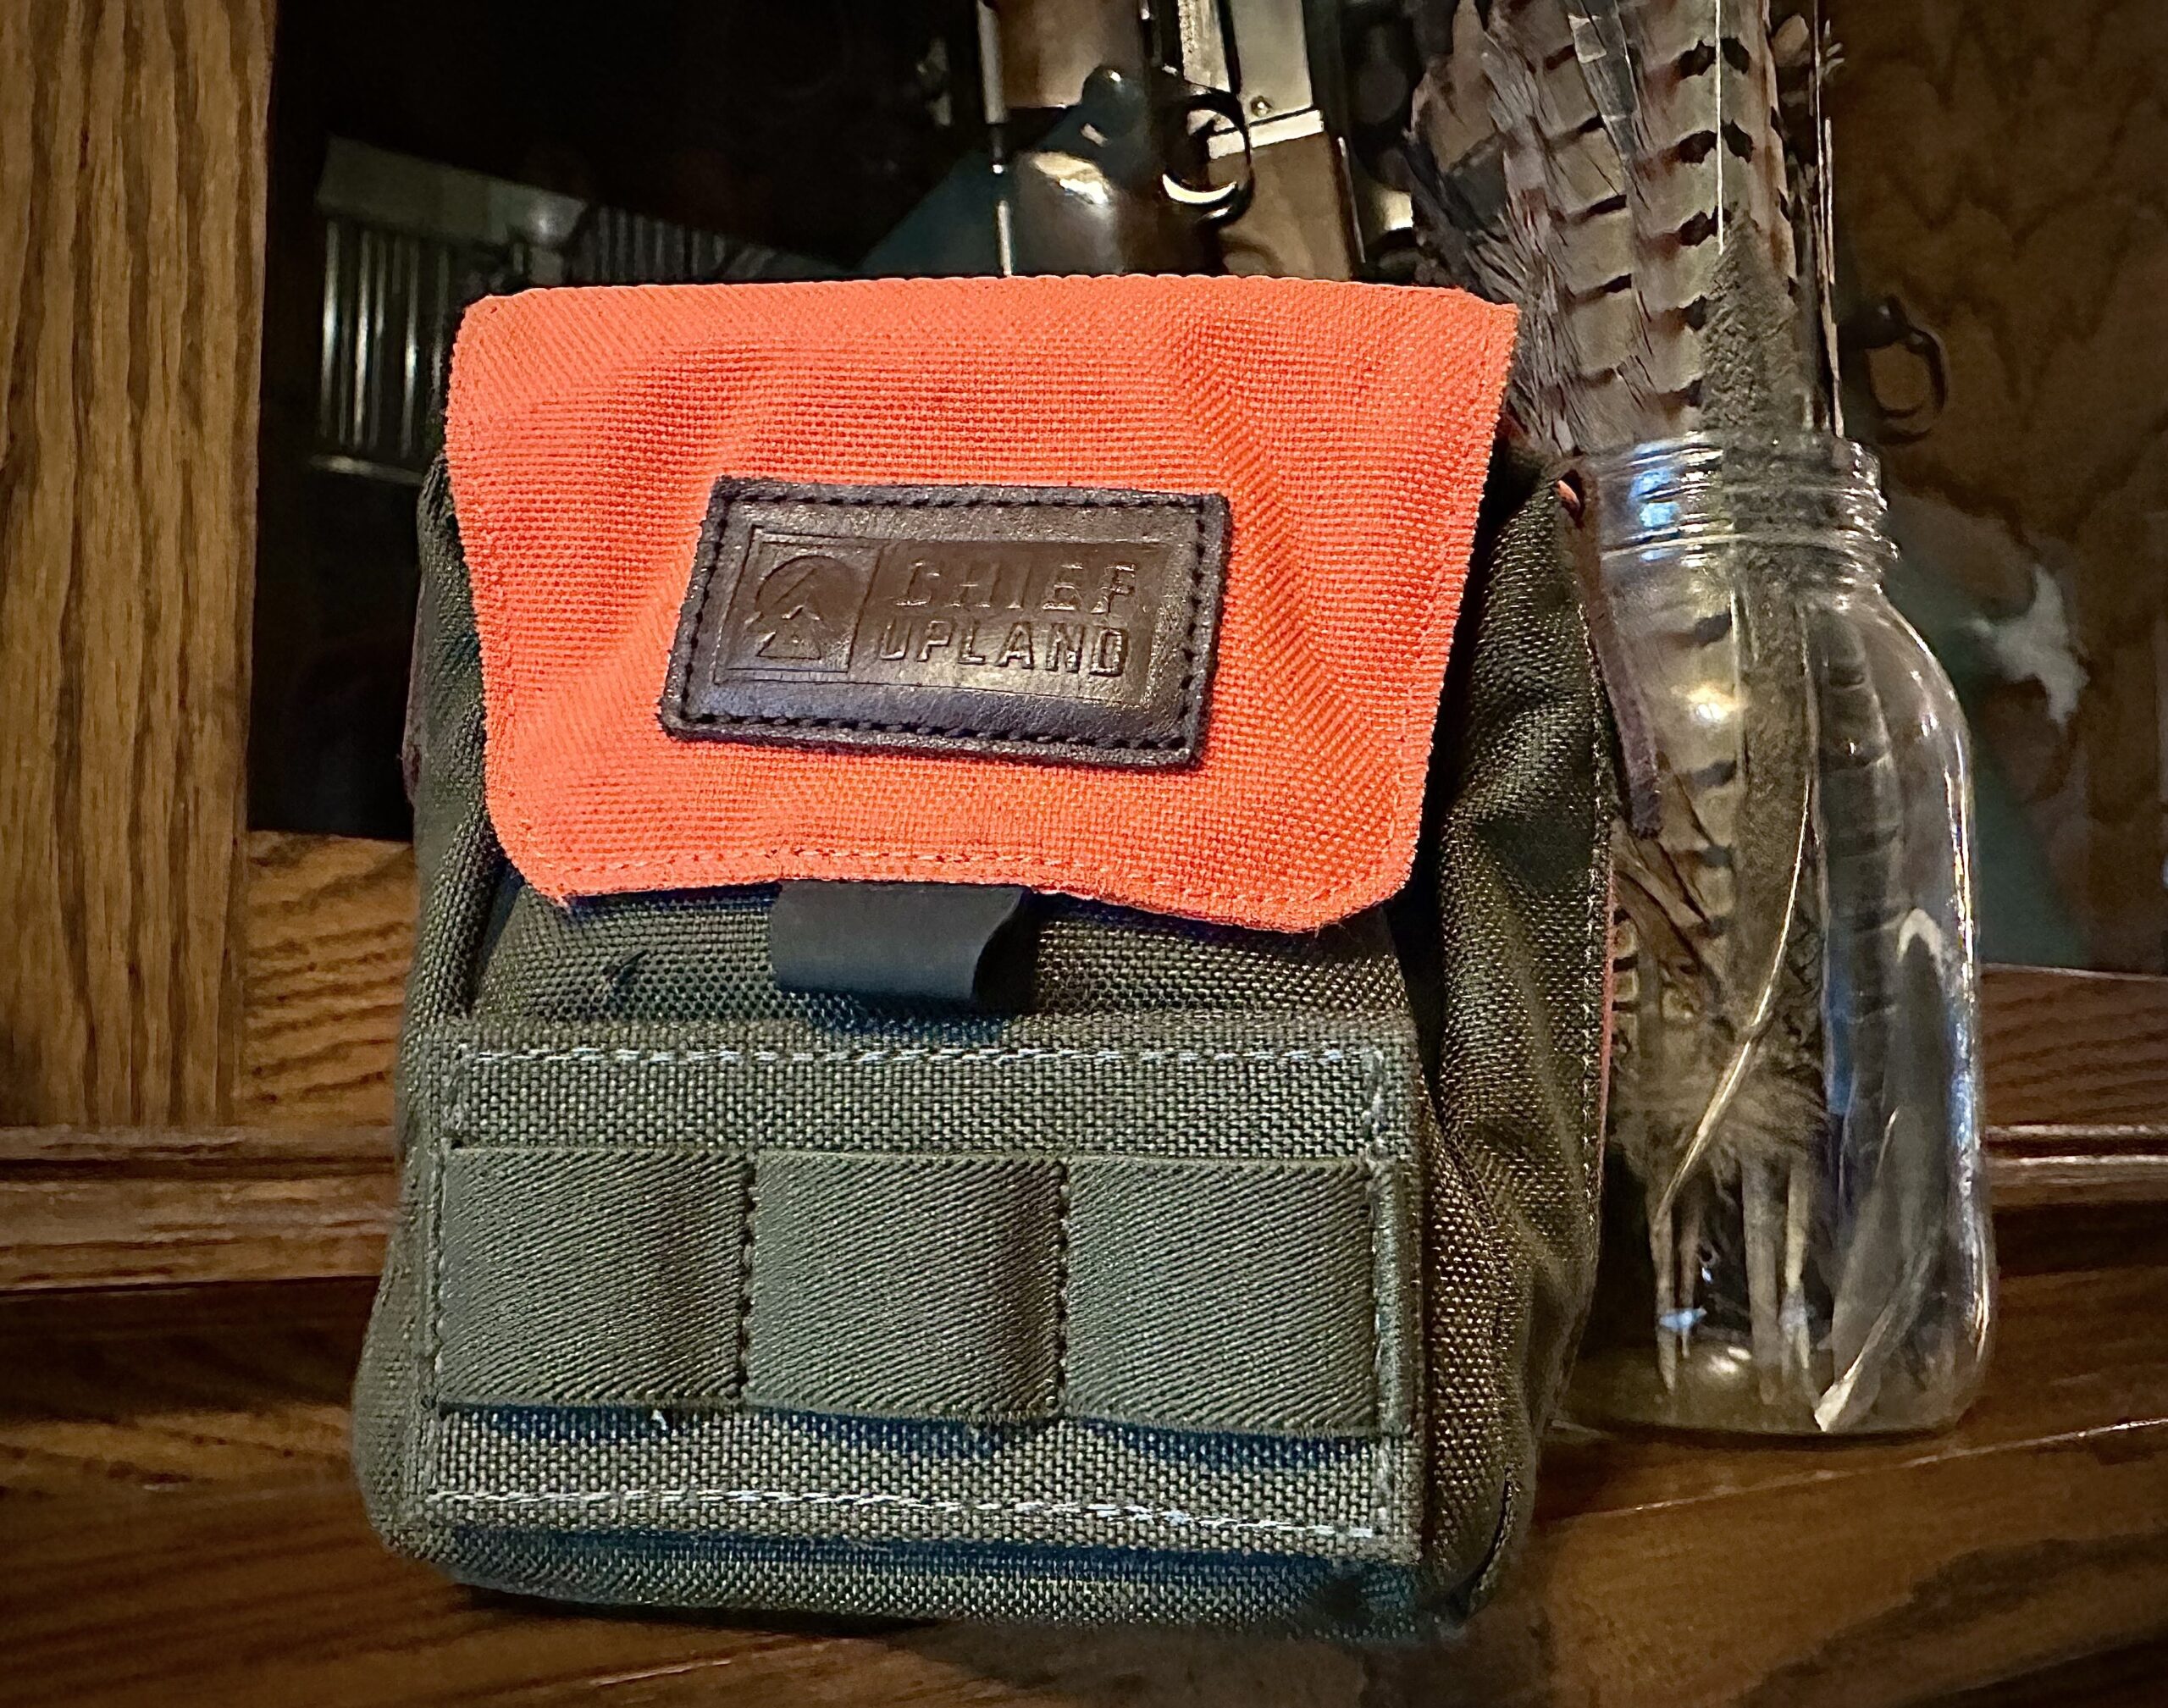 The shell pouch for the Chief Upland vest